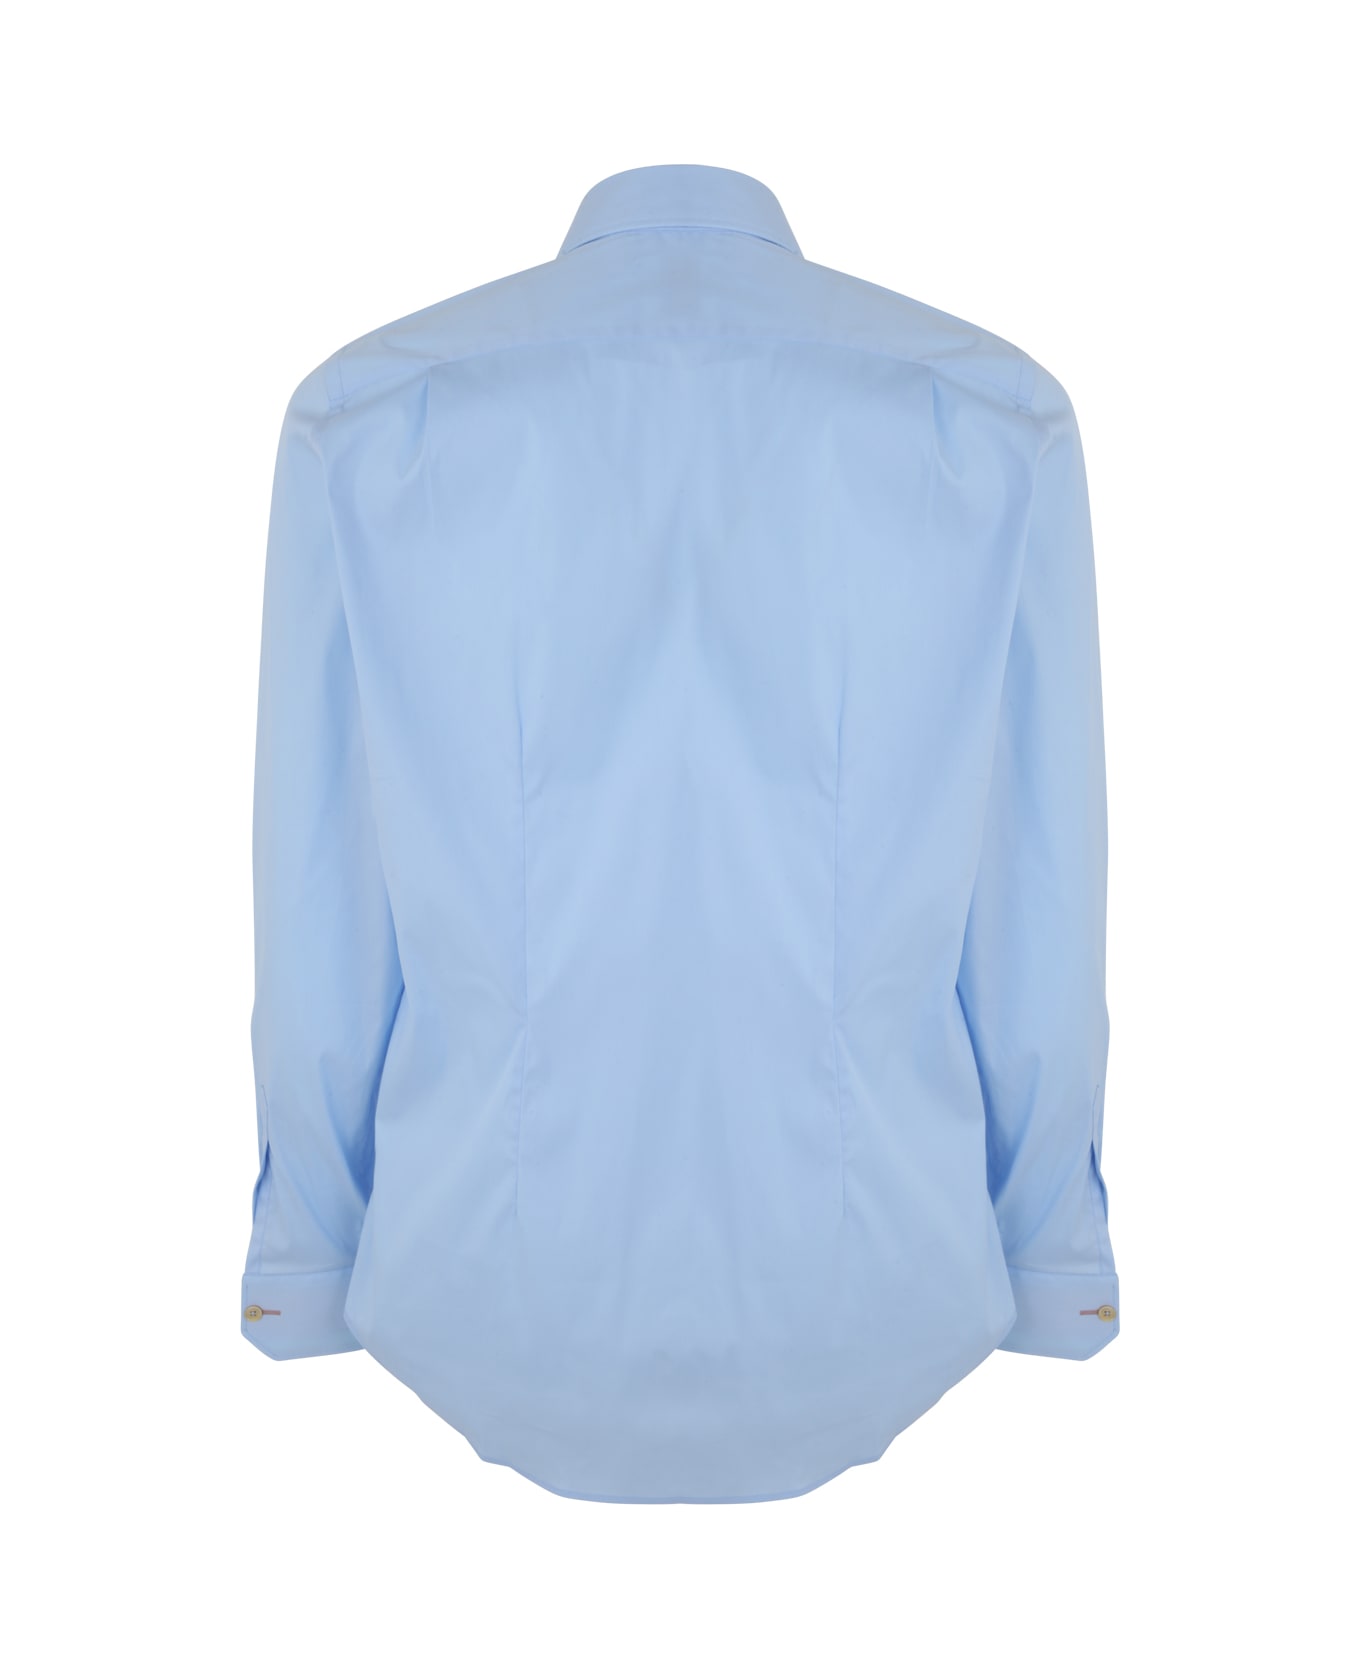 Paul Smith Mens Tailored Fit Shirt - Ltblu